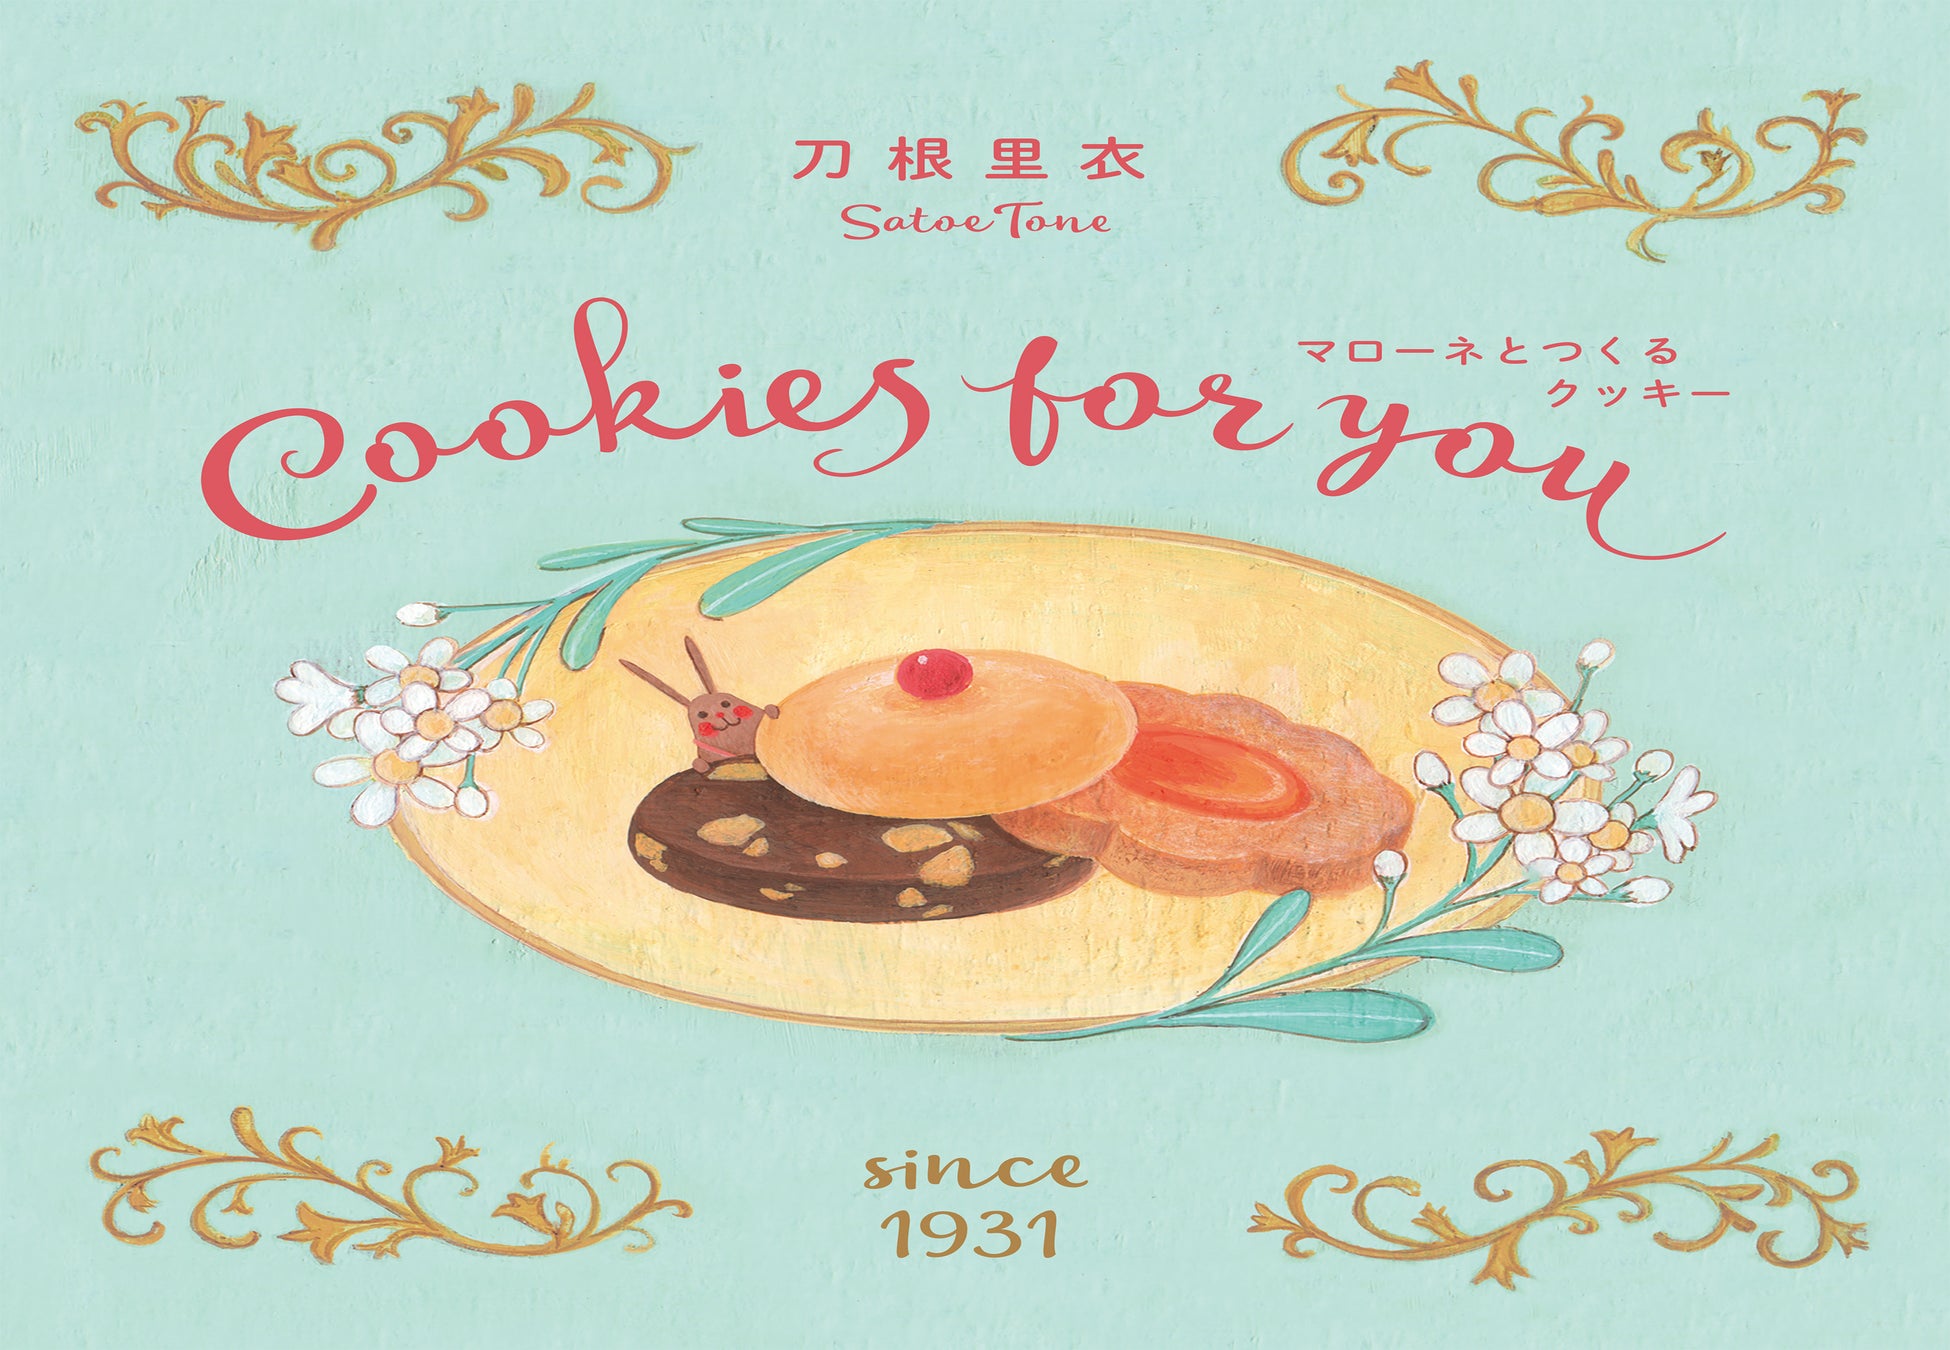 『Cookies for you  マローネとつくるクッキー』